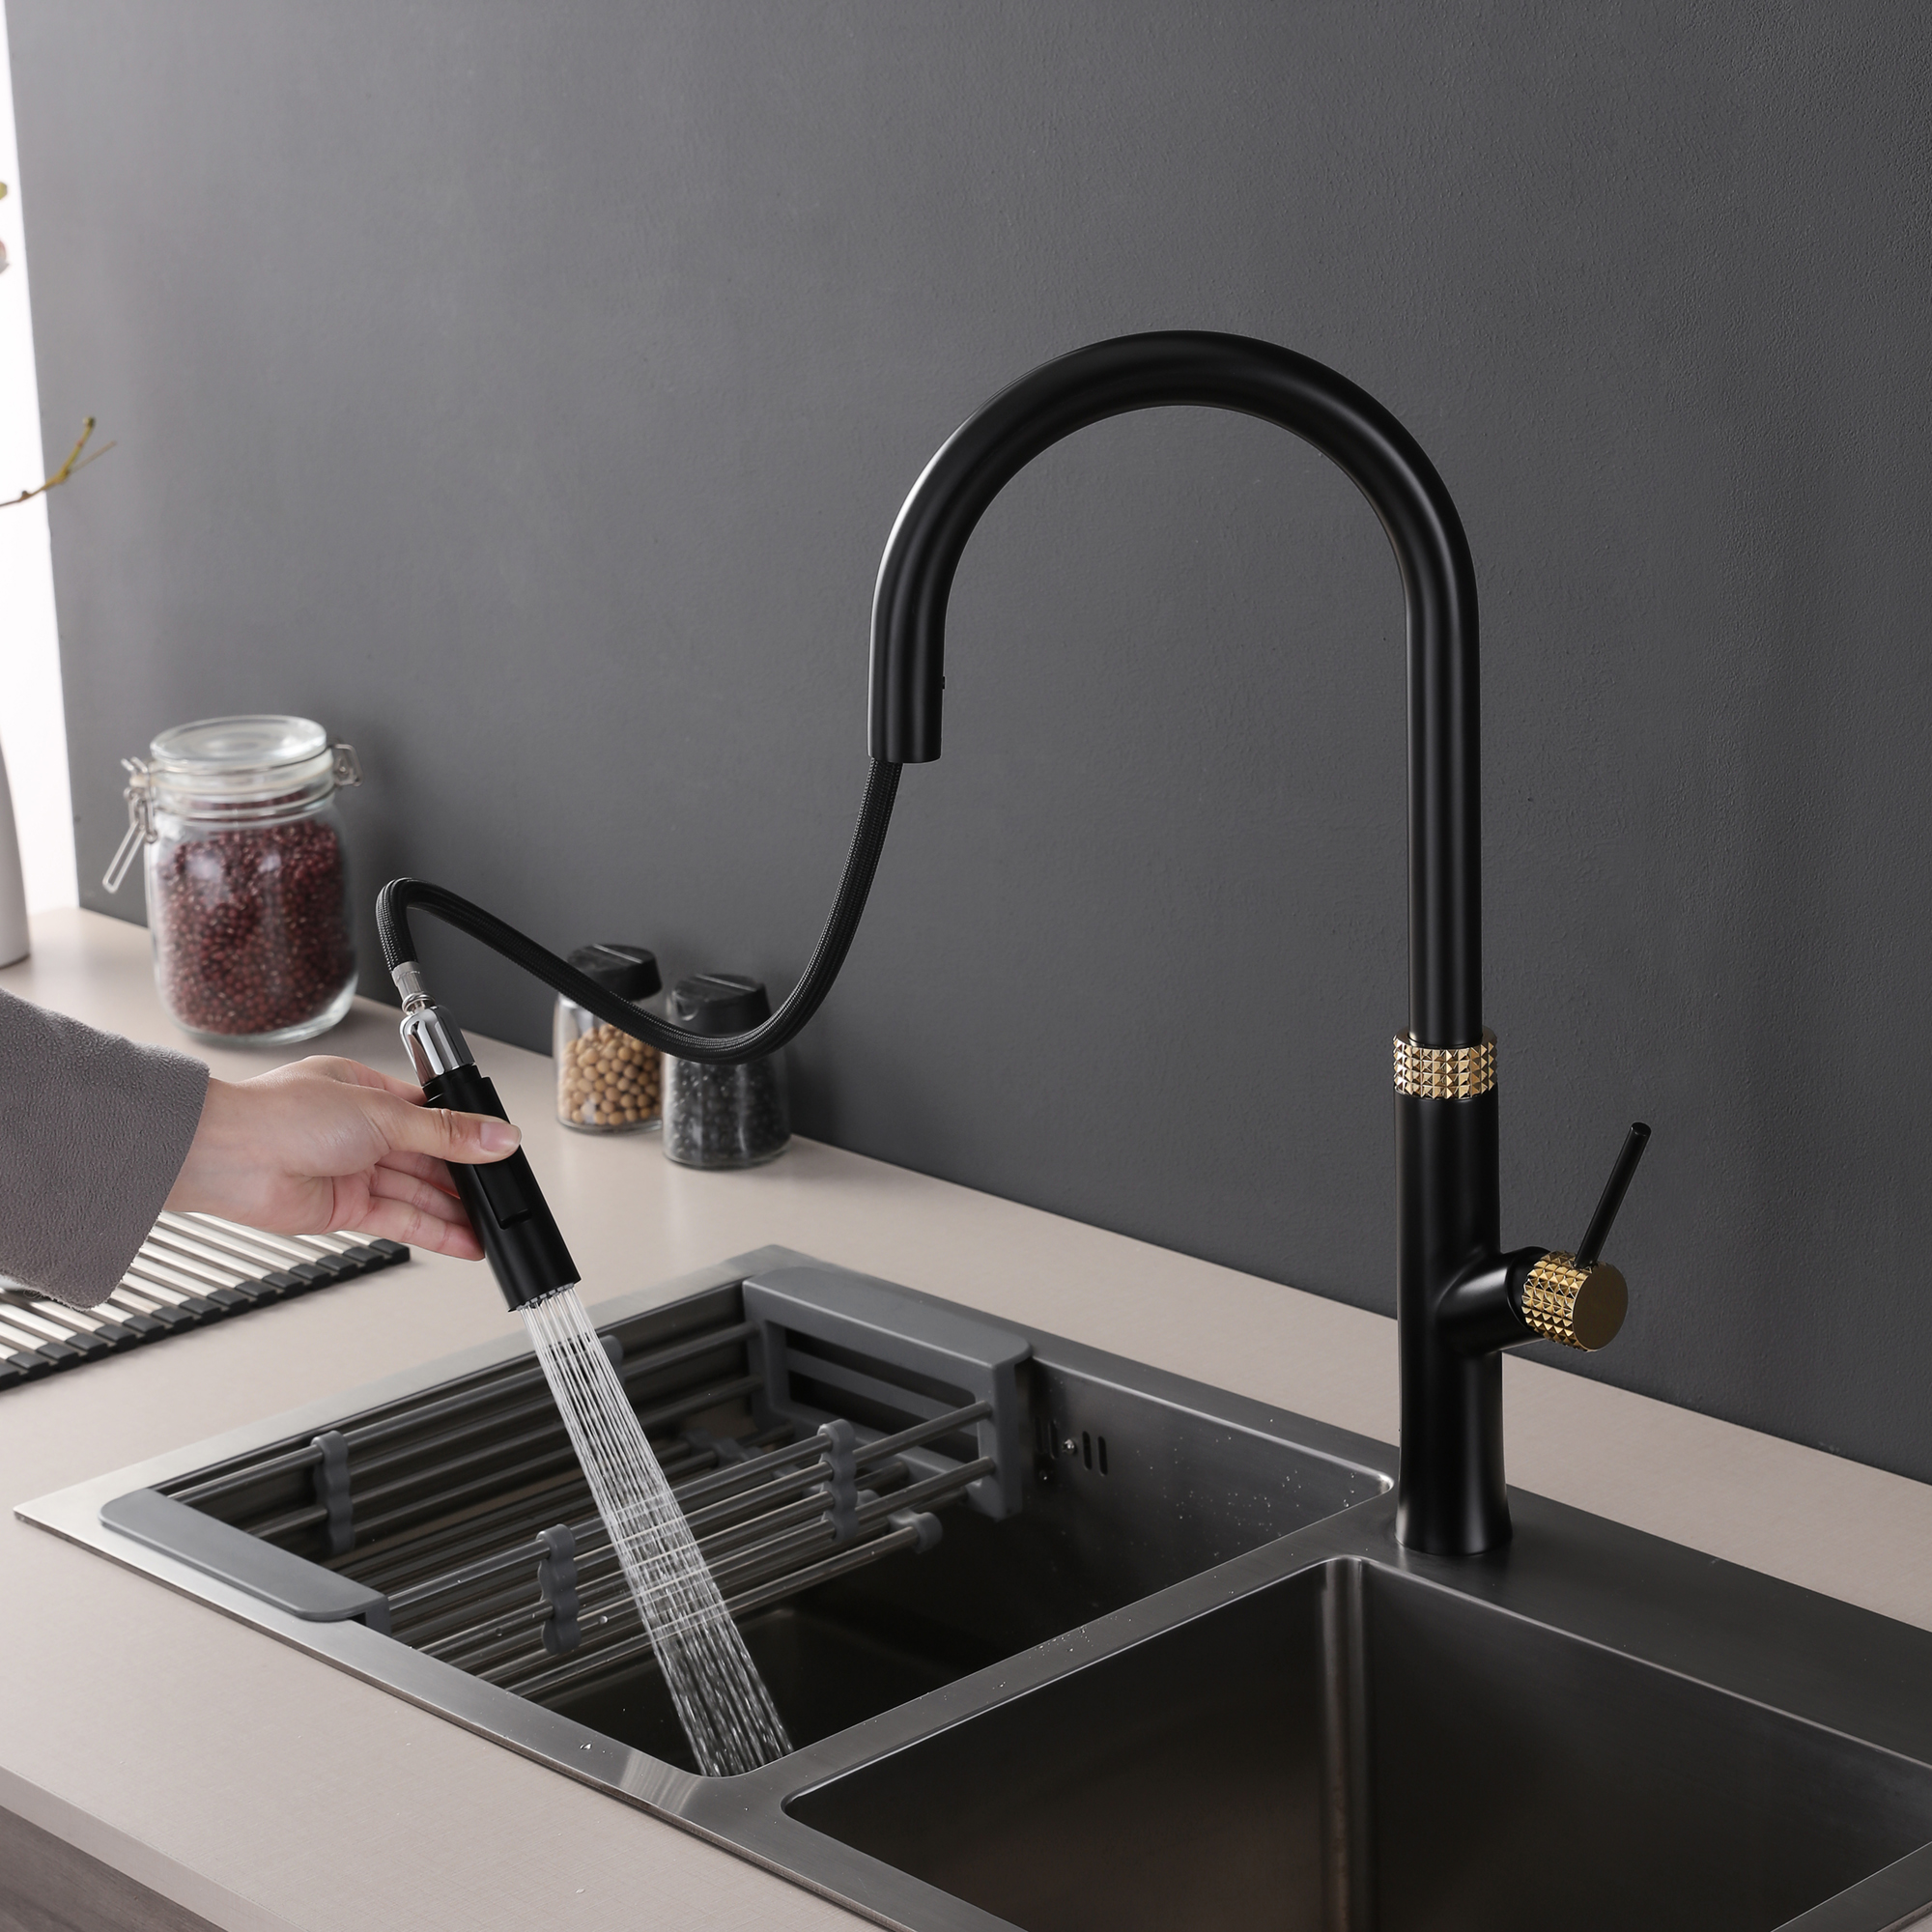 Hot Selling Black Gold Gourmet Commercial Taps Kitchen Faucet With High Quality